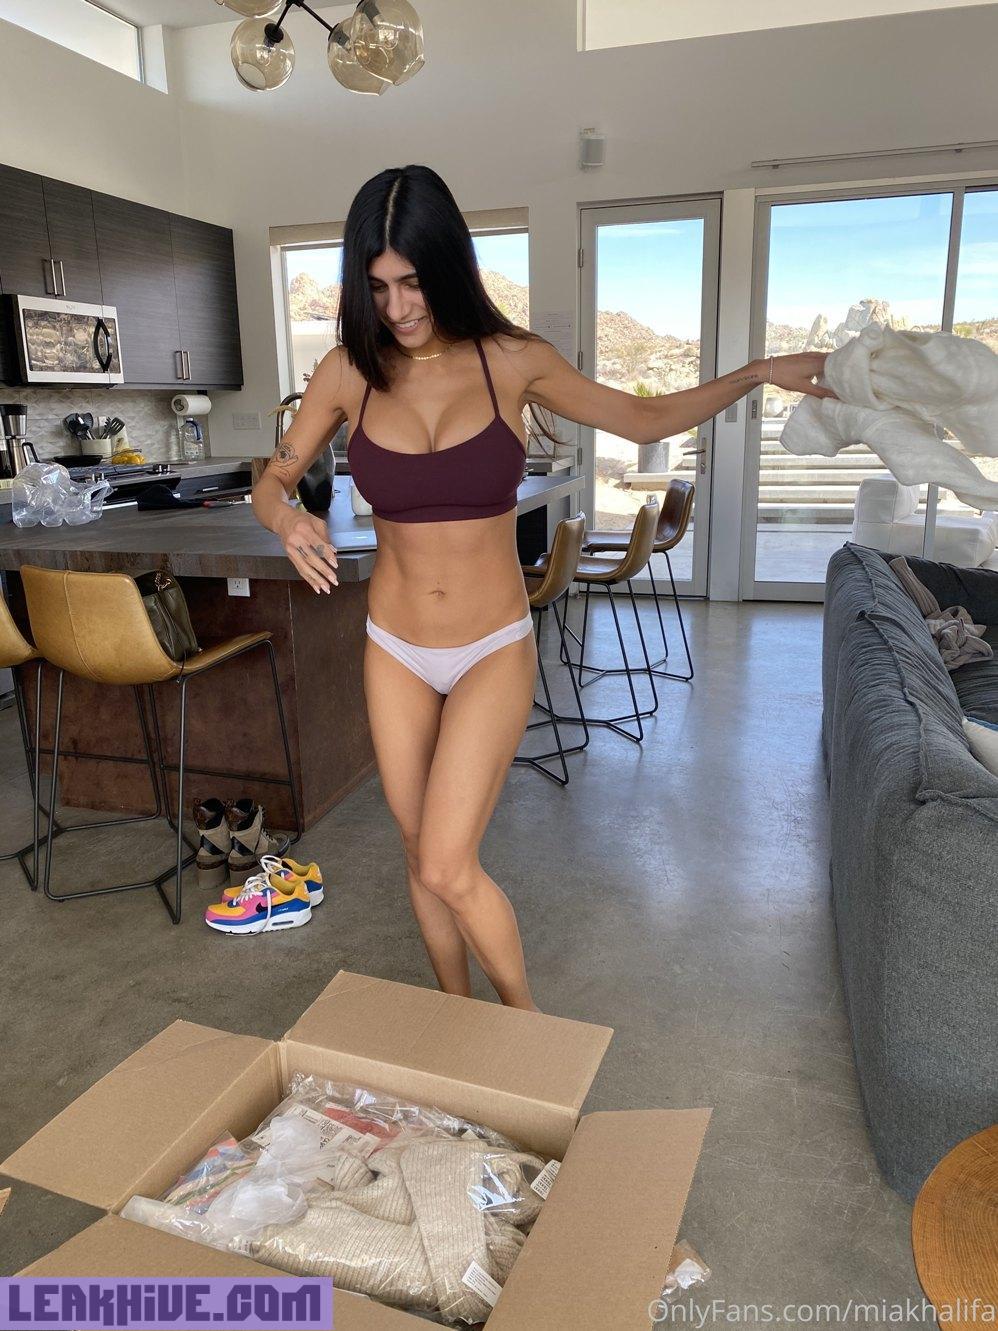 Mia Khalifa Lingerie Nightgown Patreon Set Leaked | TheFappening!